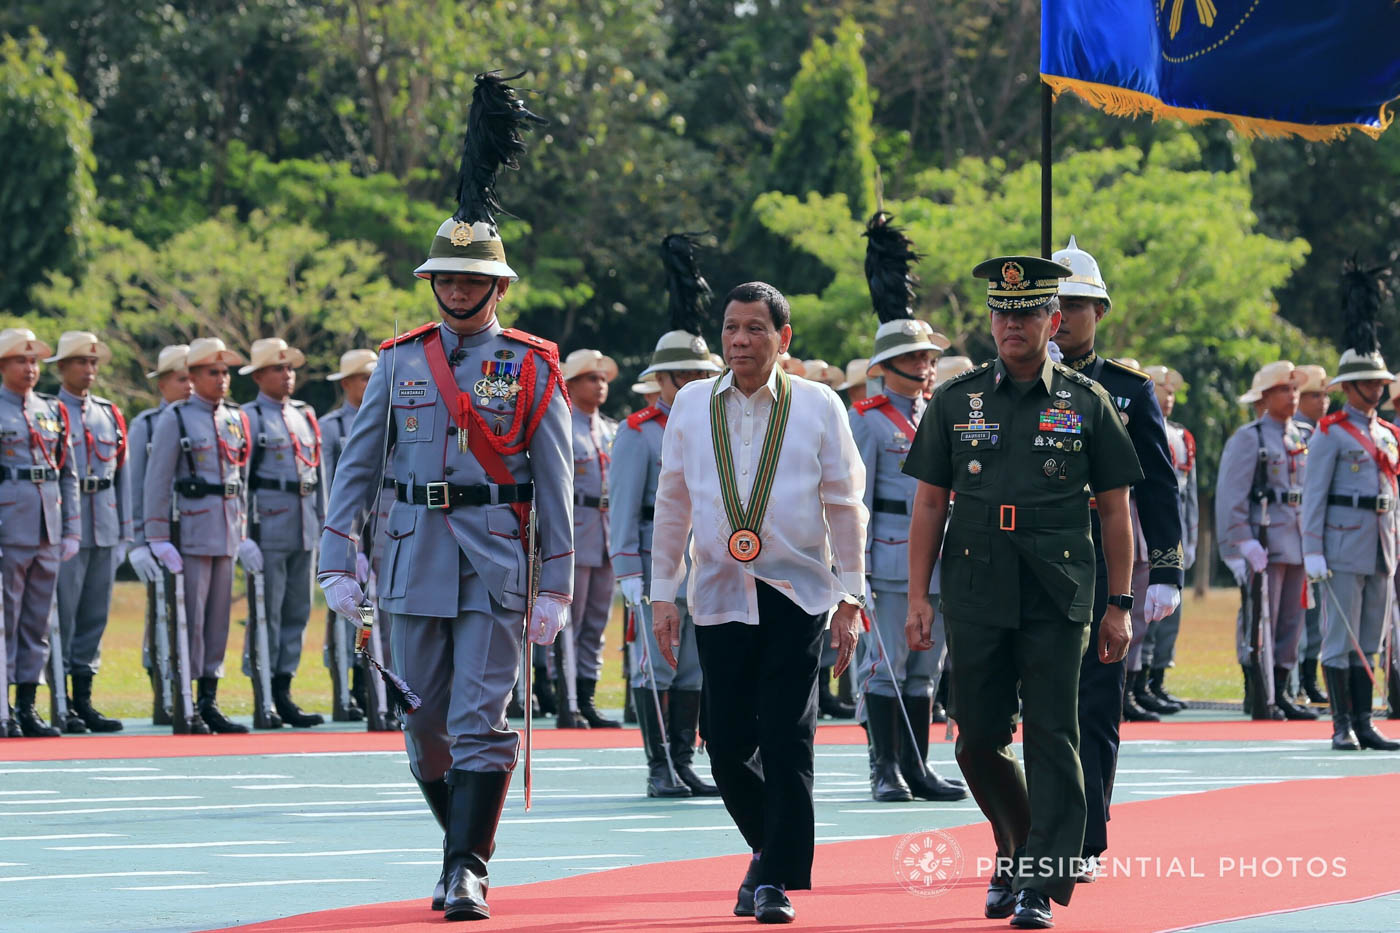 HONORS. President Rodrigo Duterte is accorded foyer honors upon his arrival at the Philippine Army headquarters for the 121st Founding Anniversary of the Philippine Army (PA) on March 20, 2018. 